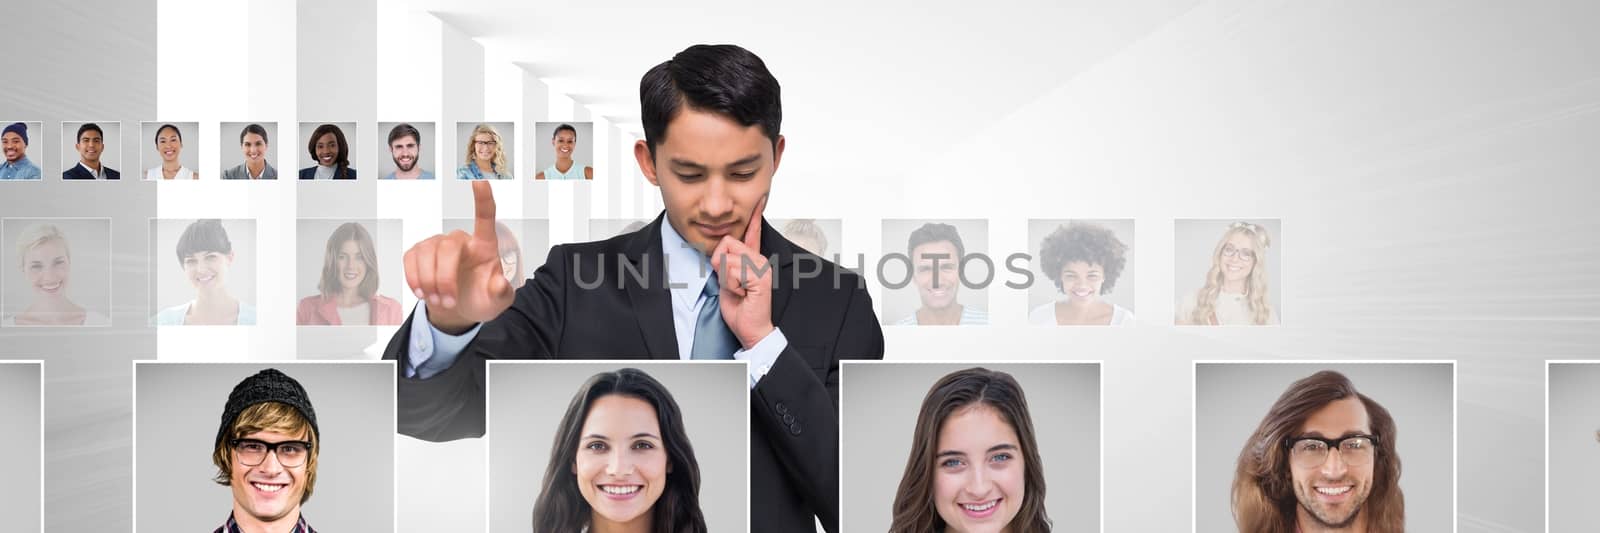 Digital composite of Man touching portrait profiles of different people